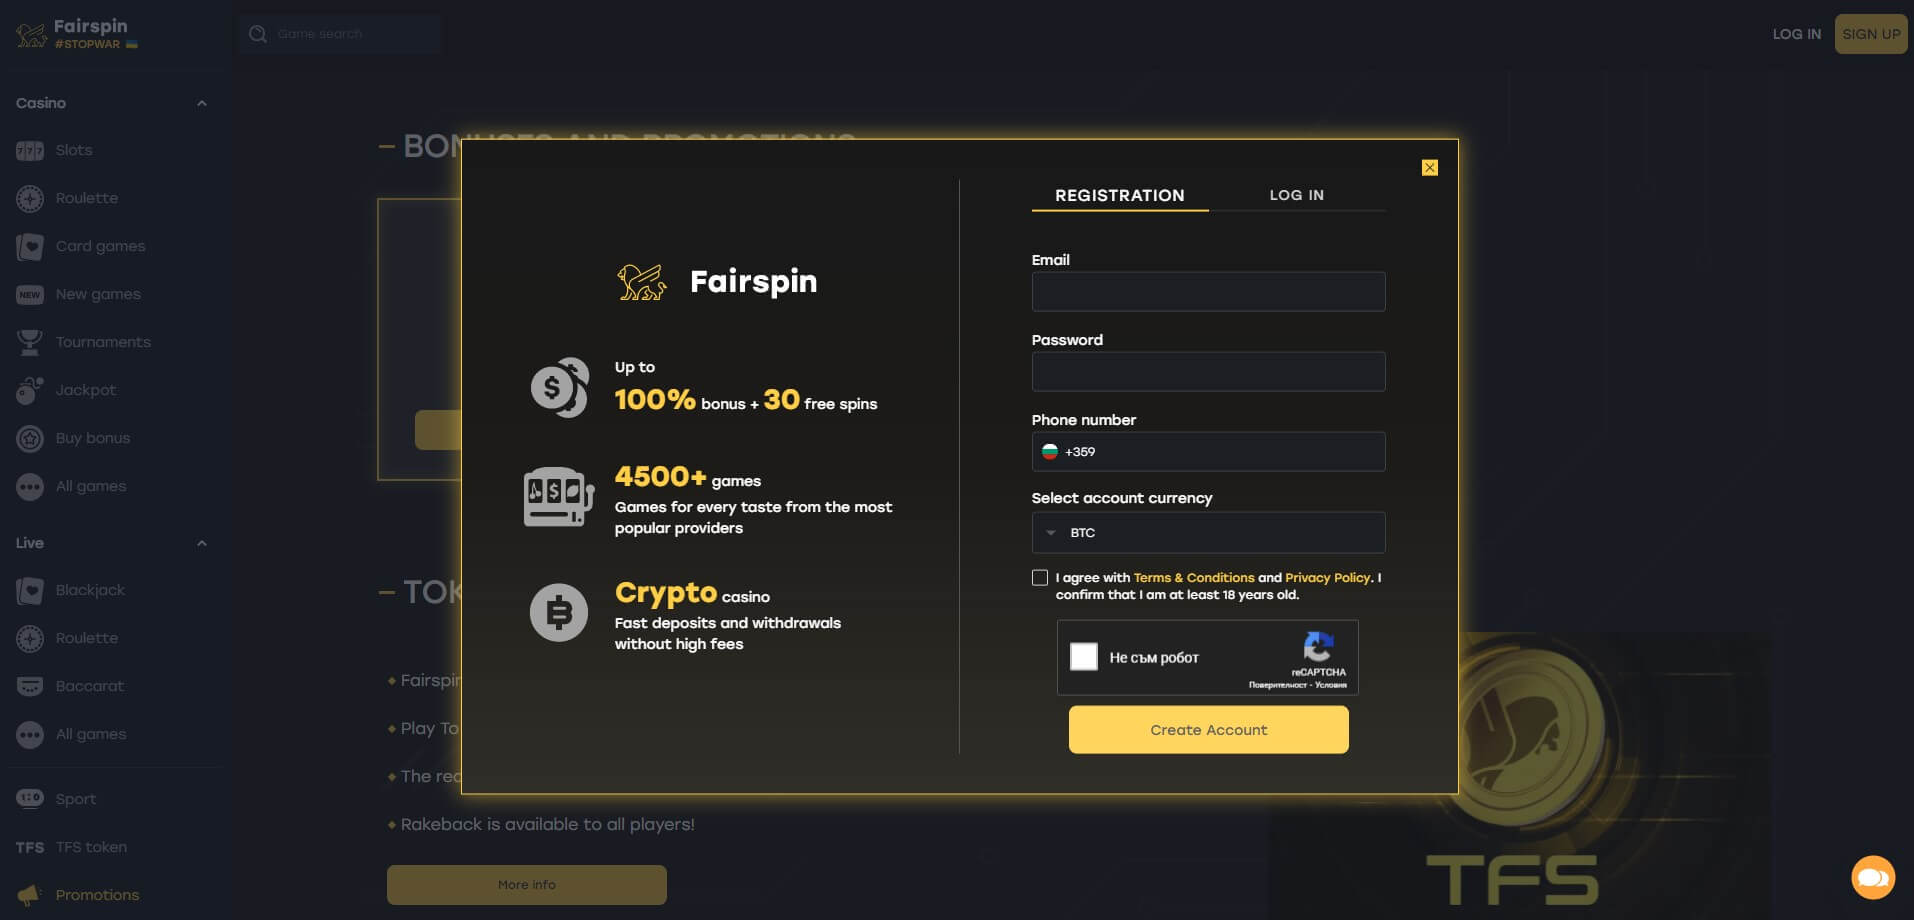 Fairspin Casino SignUp